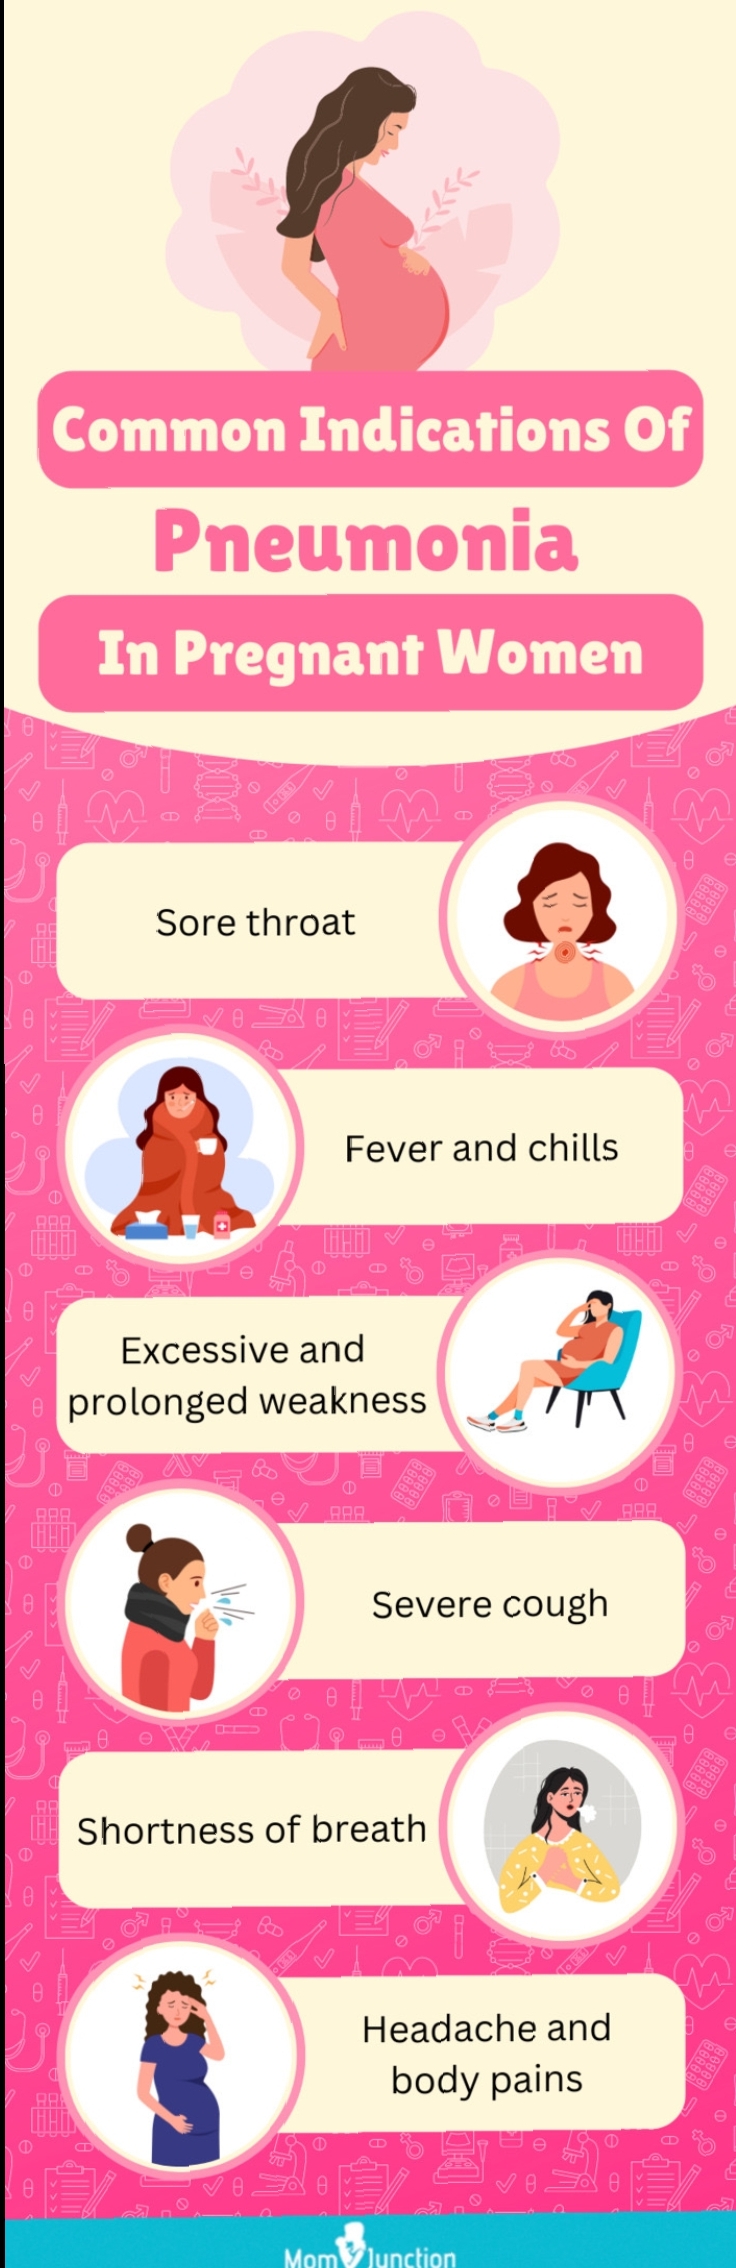 Common Indications Of

In Pregnant Women

Sore throat

 

Fever and chills

Excessive and
prolonged weakness

Severe cough

Shortness of breath

Headache and
body pains